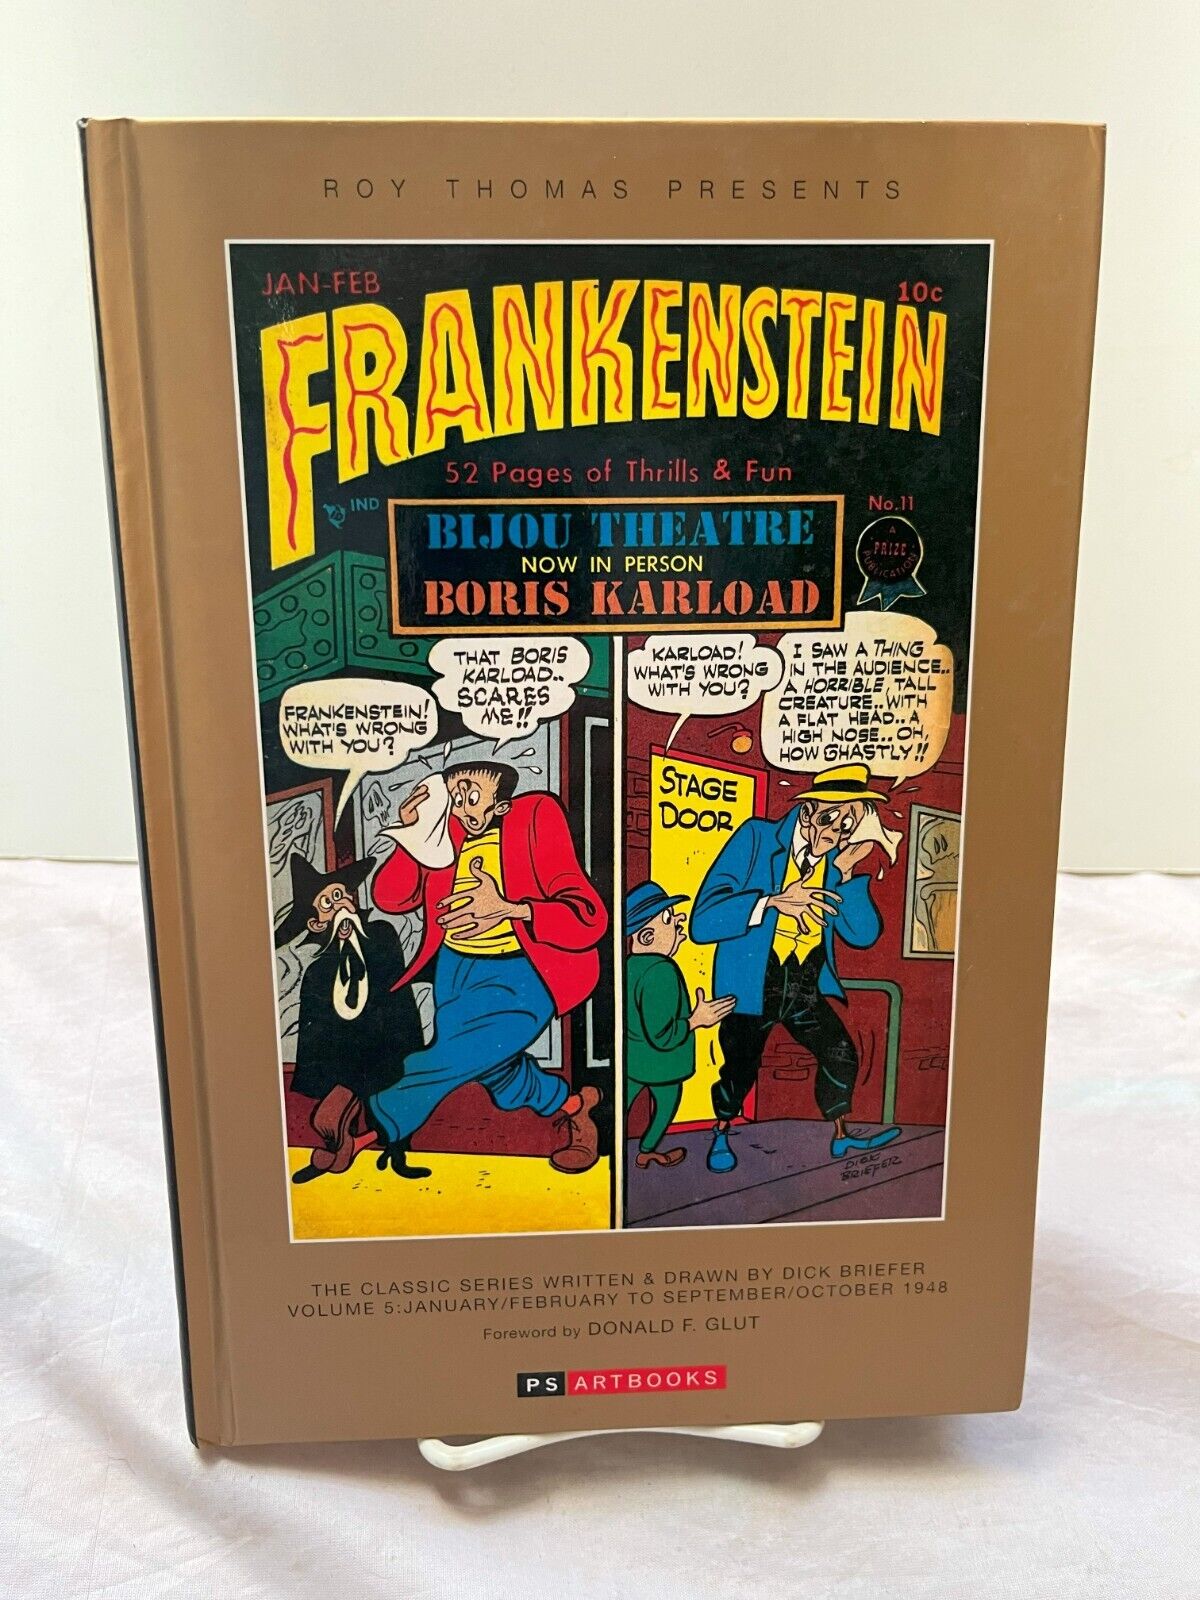 Roy Thomas Presents Frankenstein: The Classic Series Dick Briefer #5